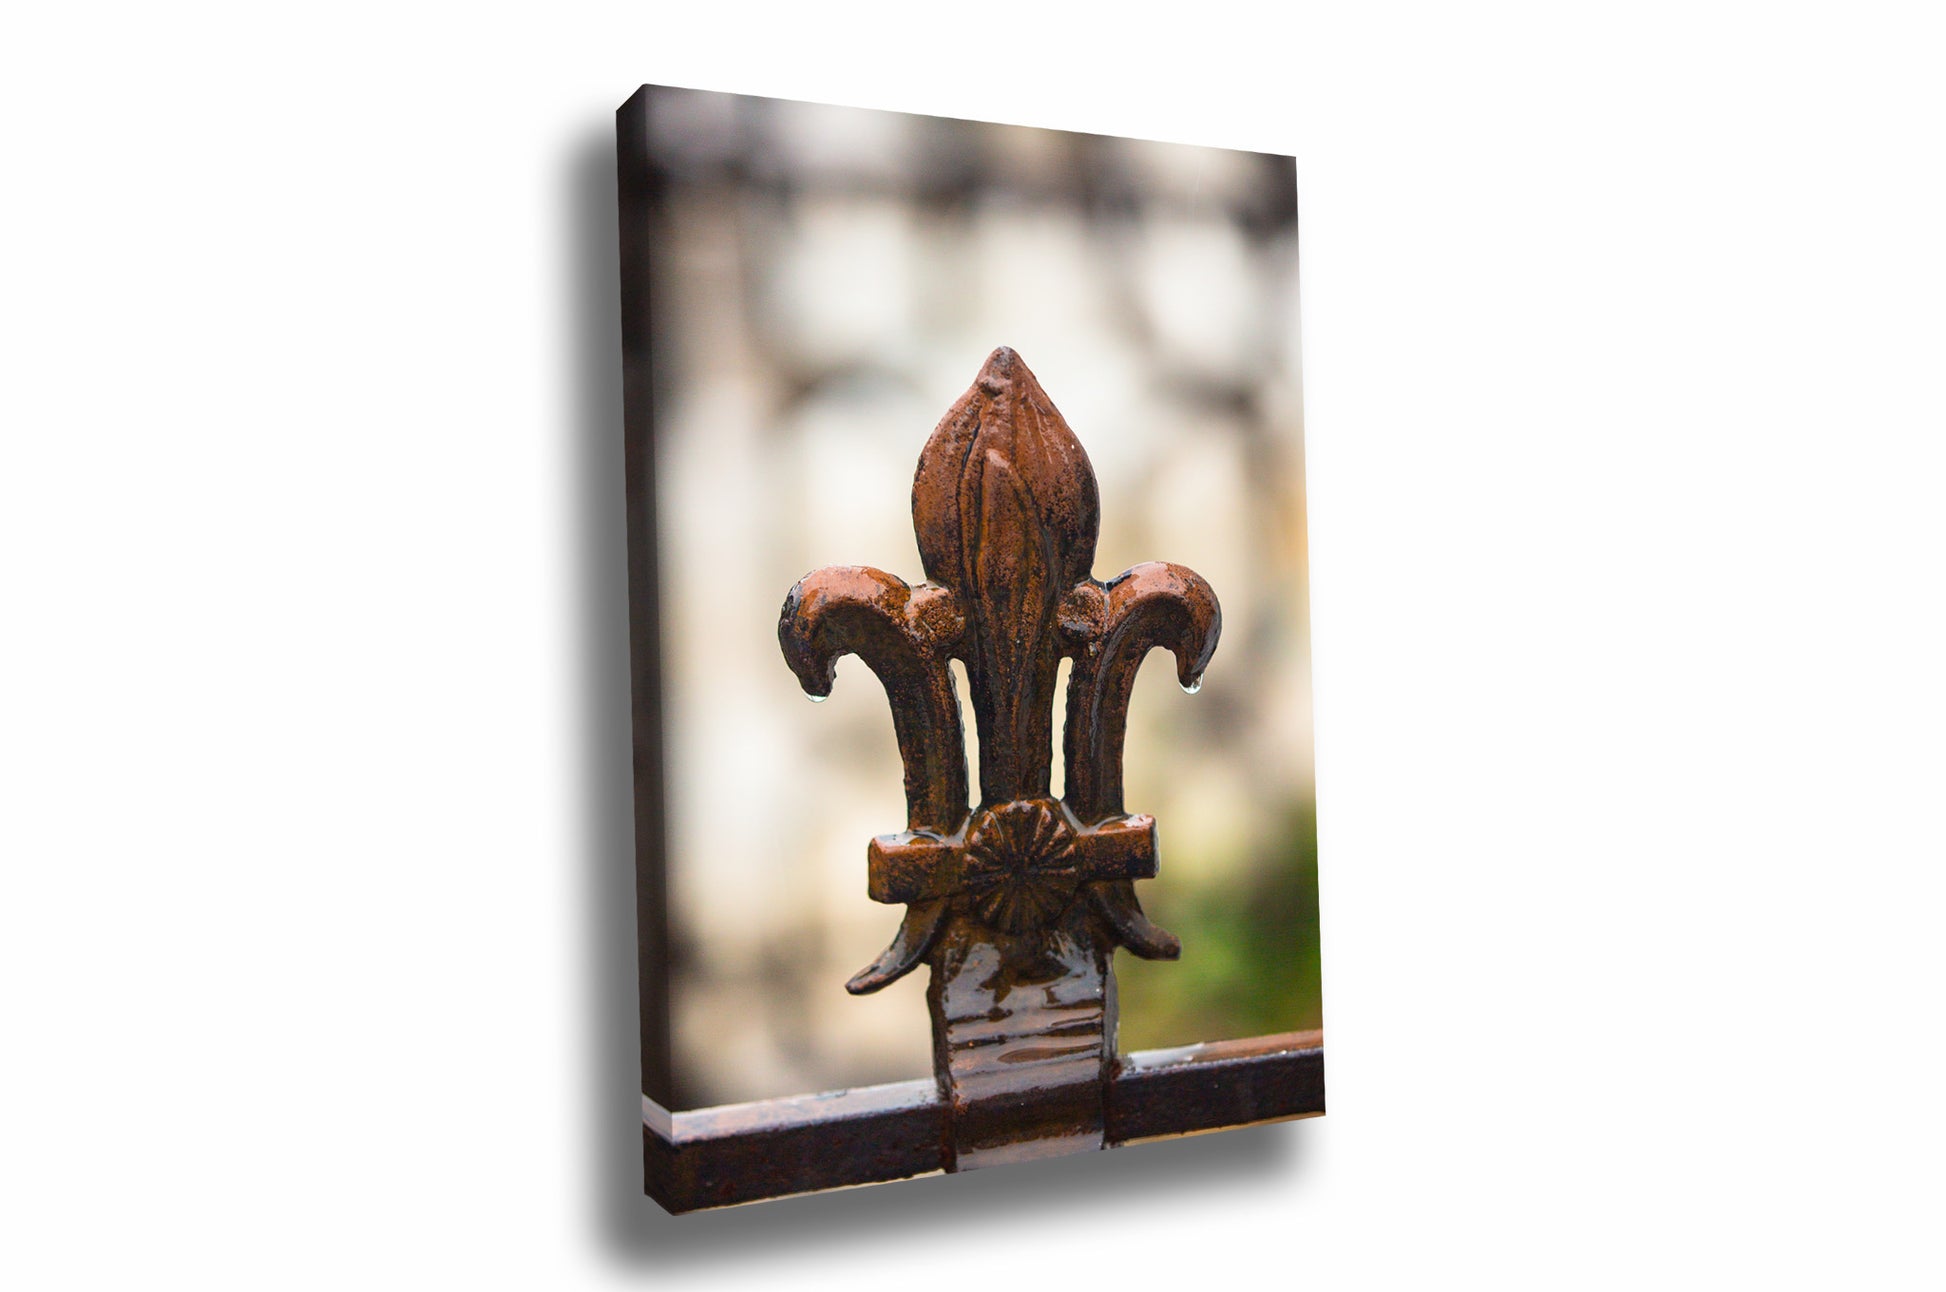 Saints canvas wall art of raindrops falling from a wrought iron Fleur de Lis along a fence on a rainy day in the New Orleans French Quarter by Sean Ramsey of Southern Plains Photography.